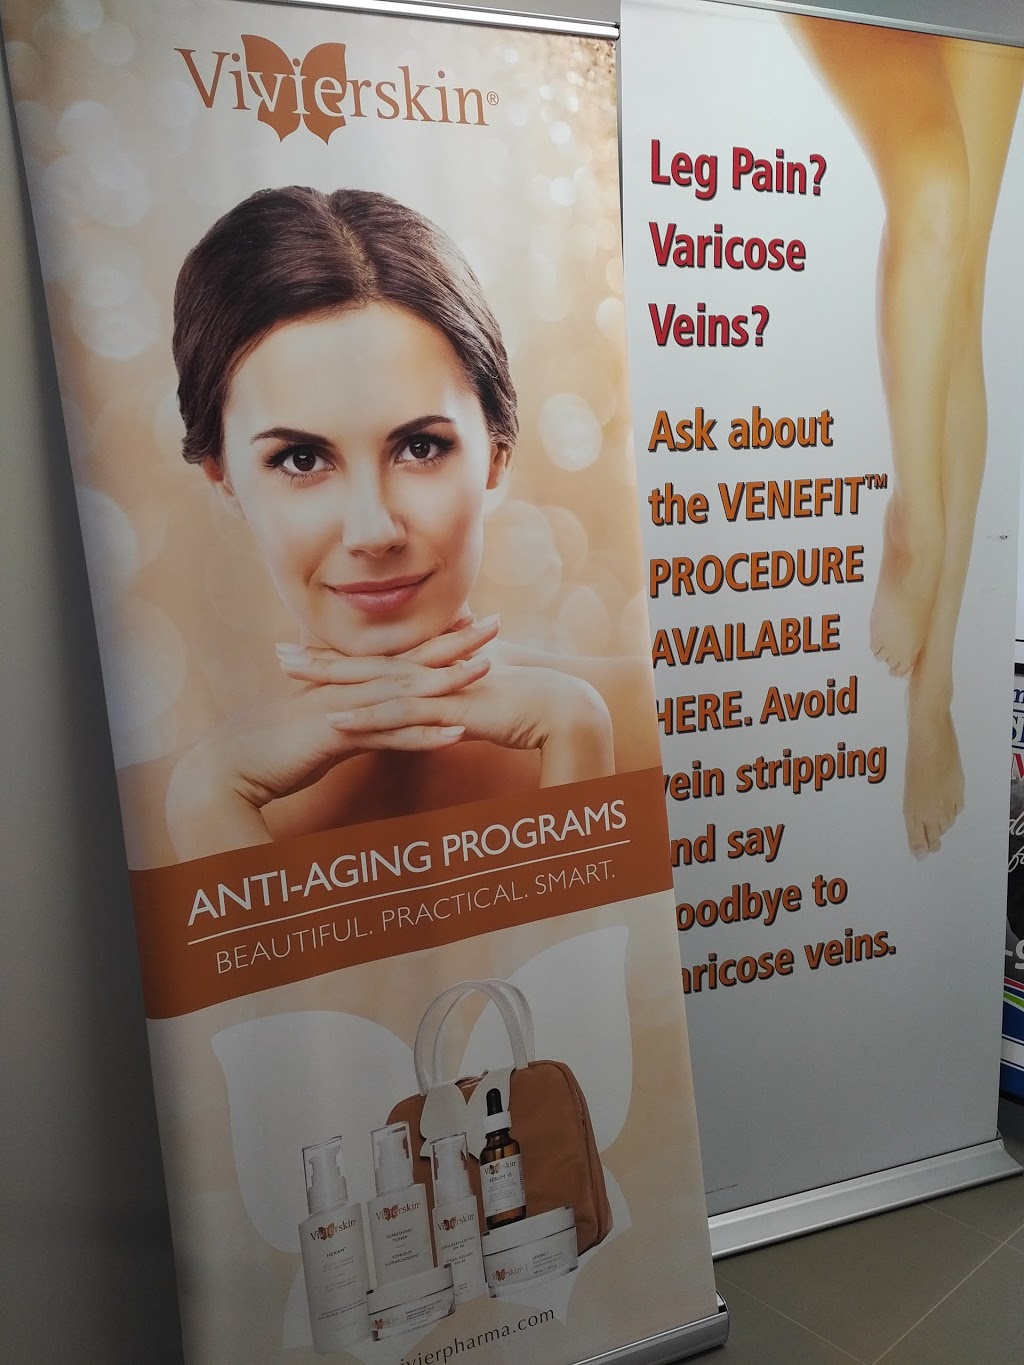 Cosmetic Medical Clinic & Vein Clinic | 225 Carleton Dr suite 102, St. Albert, AB T8N 4J9, Canada | Phone: (780) 459-7769